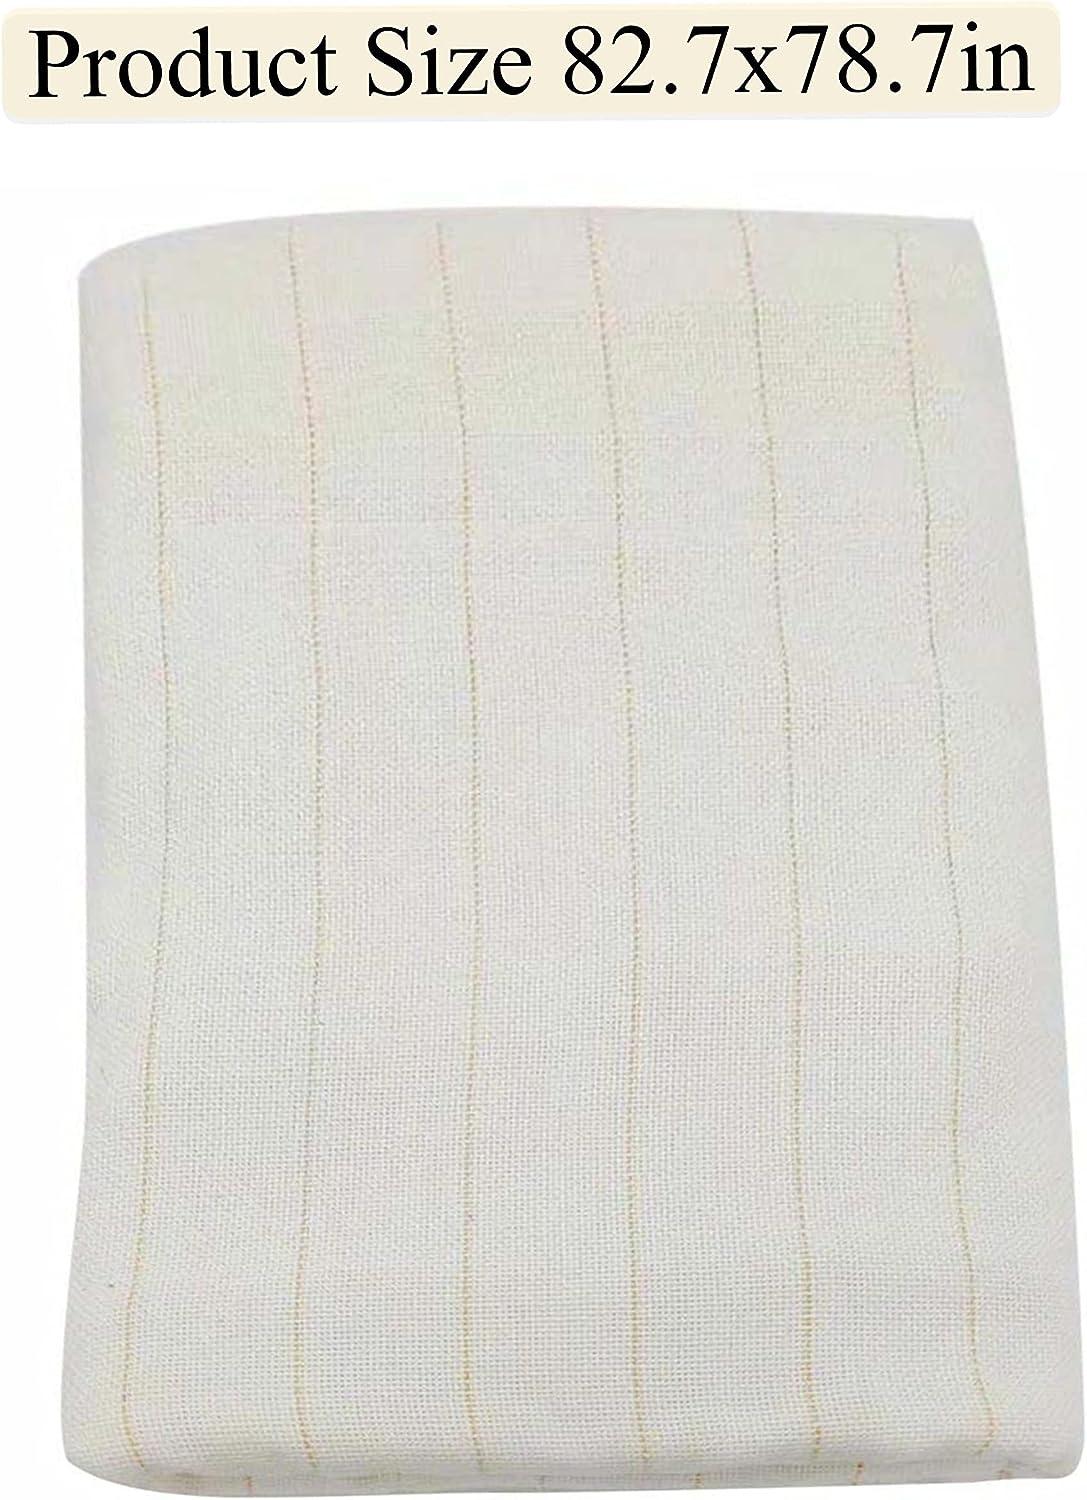 Jonas C 79 × 59 Primary Tufting Cloth for Making Rugs, Tufting Fabric with Marked Lines, Monks Cloth for Tufting Gun and Punch Needle, Punch